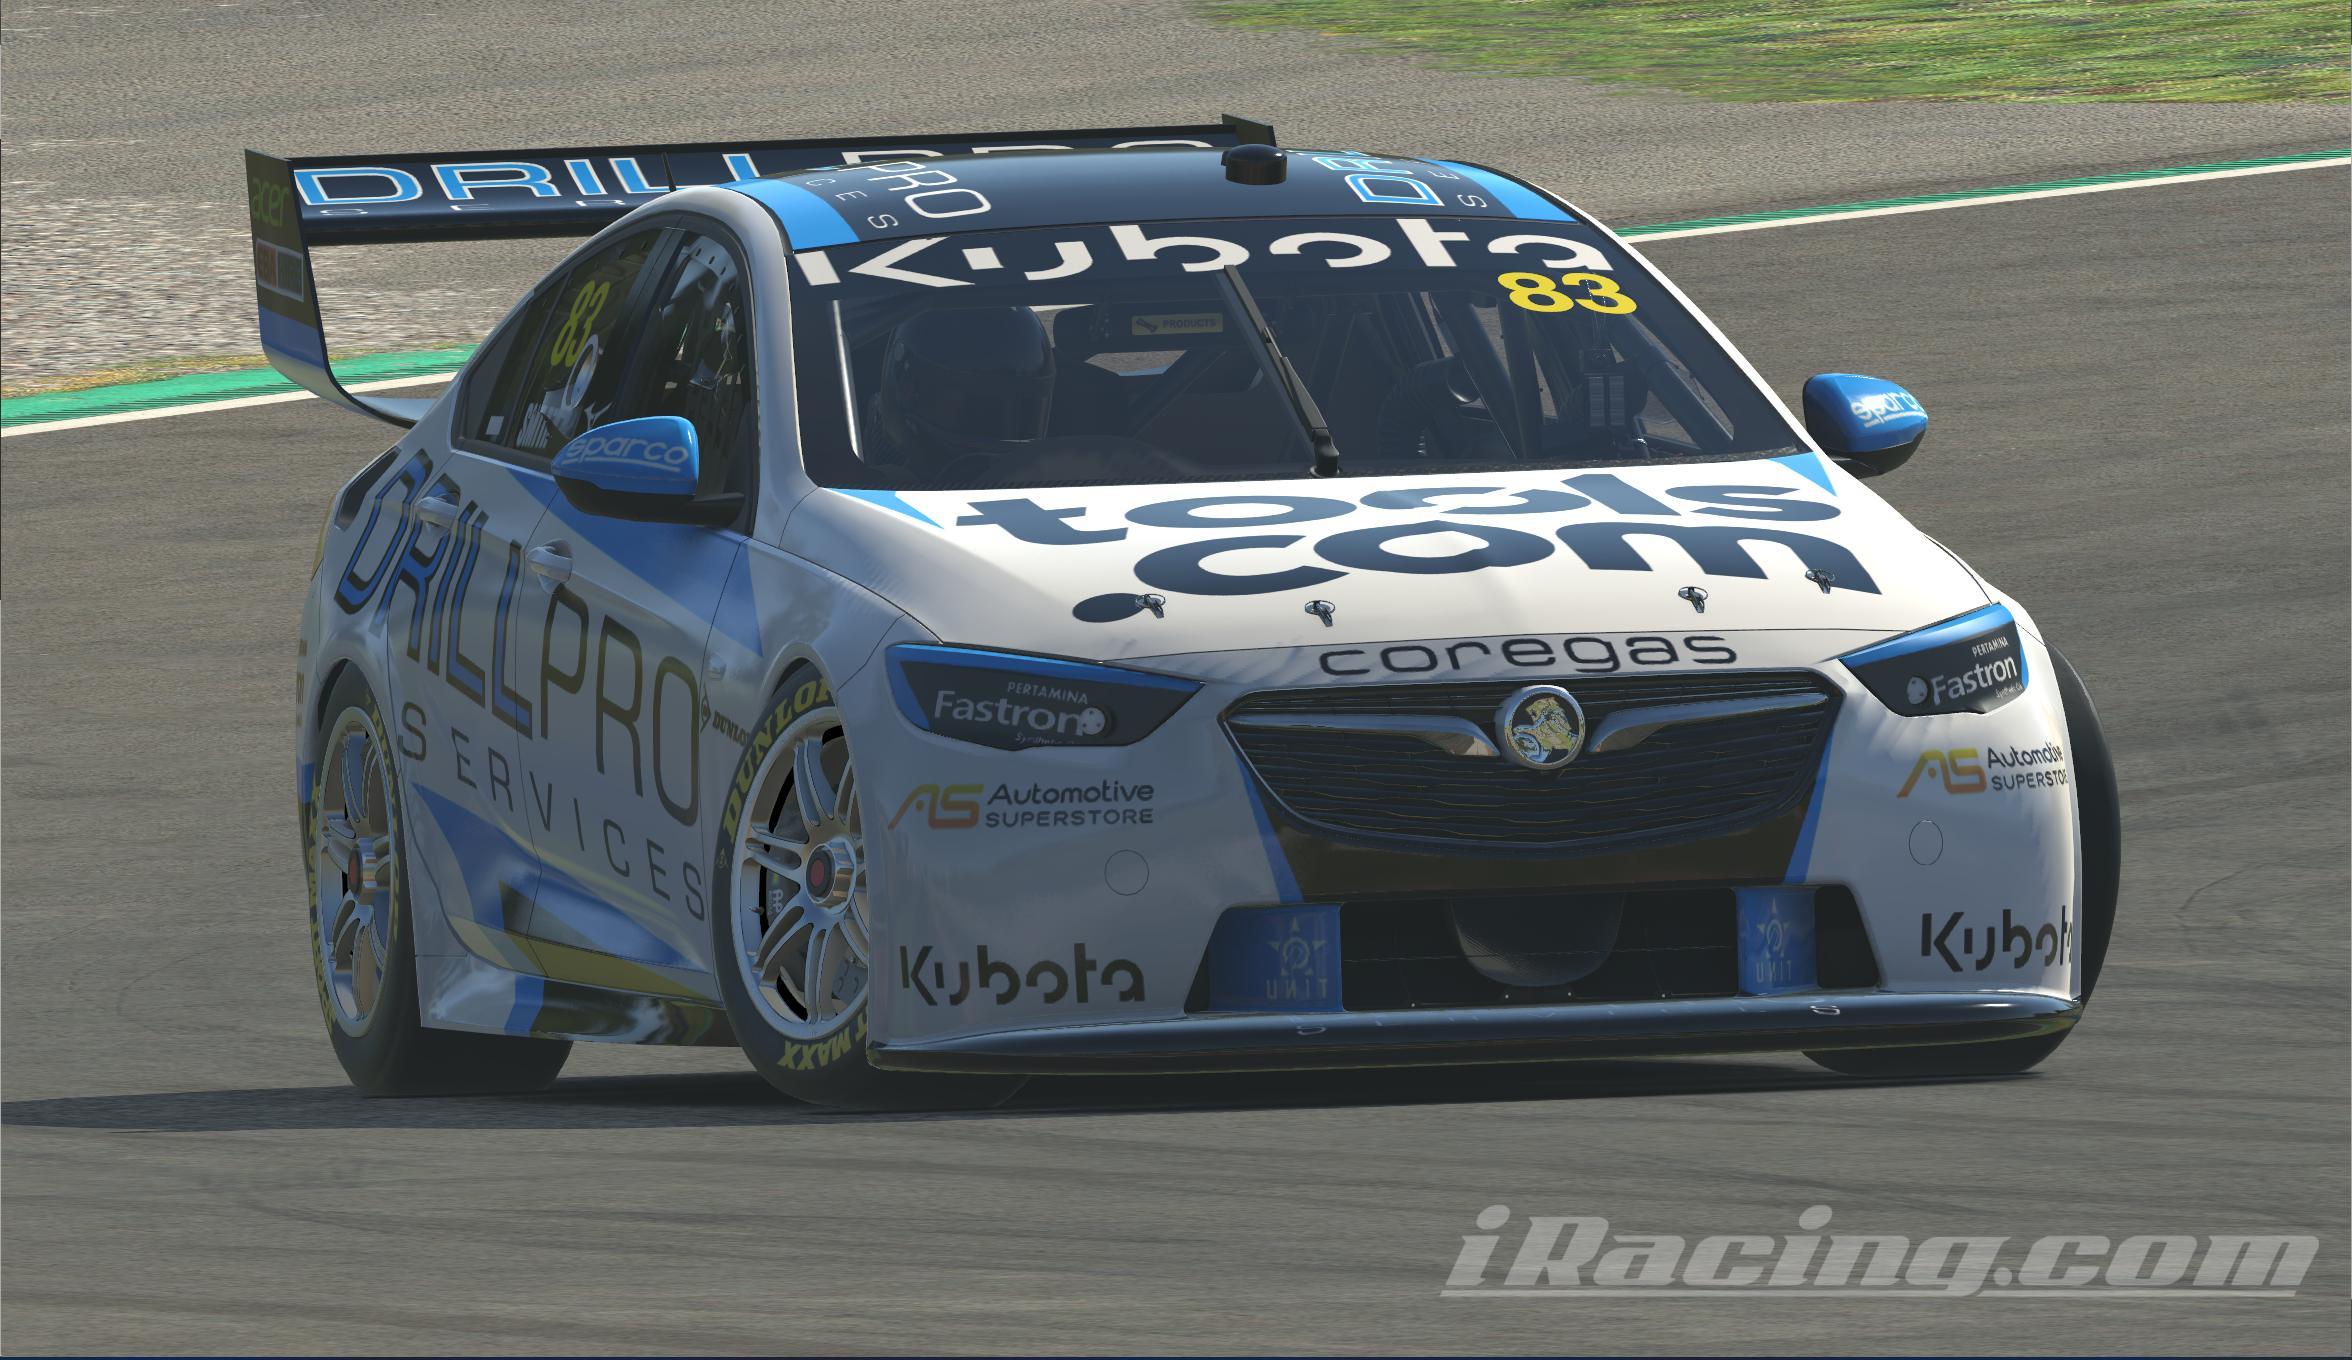 Preview of BJR Macauley Jones Drill Pro Winton Livery by Christopher N S.